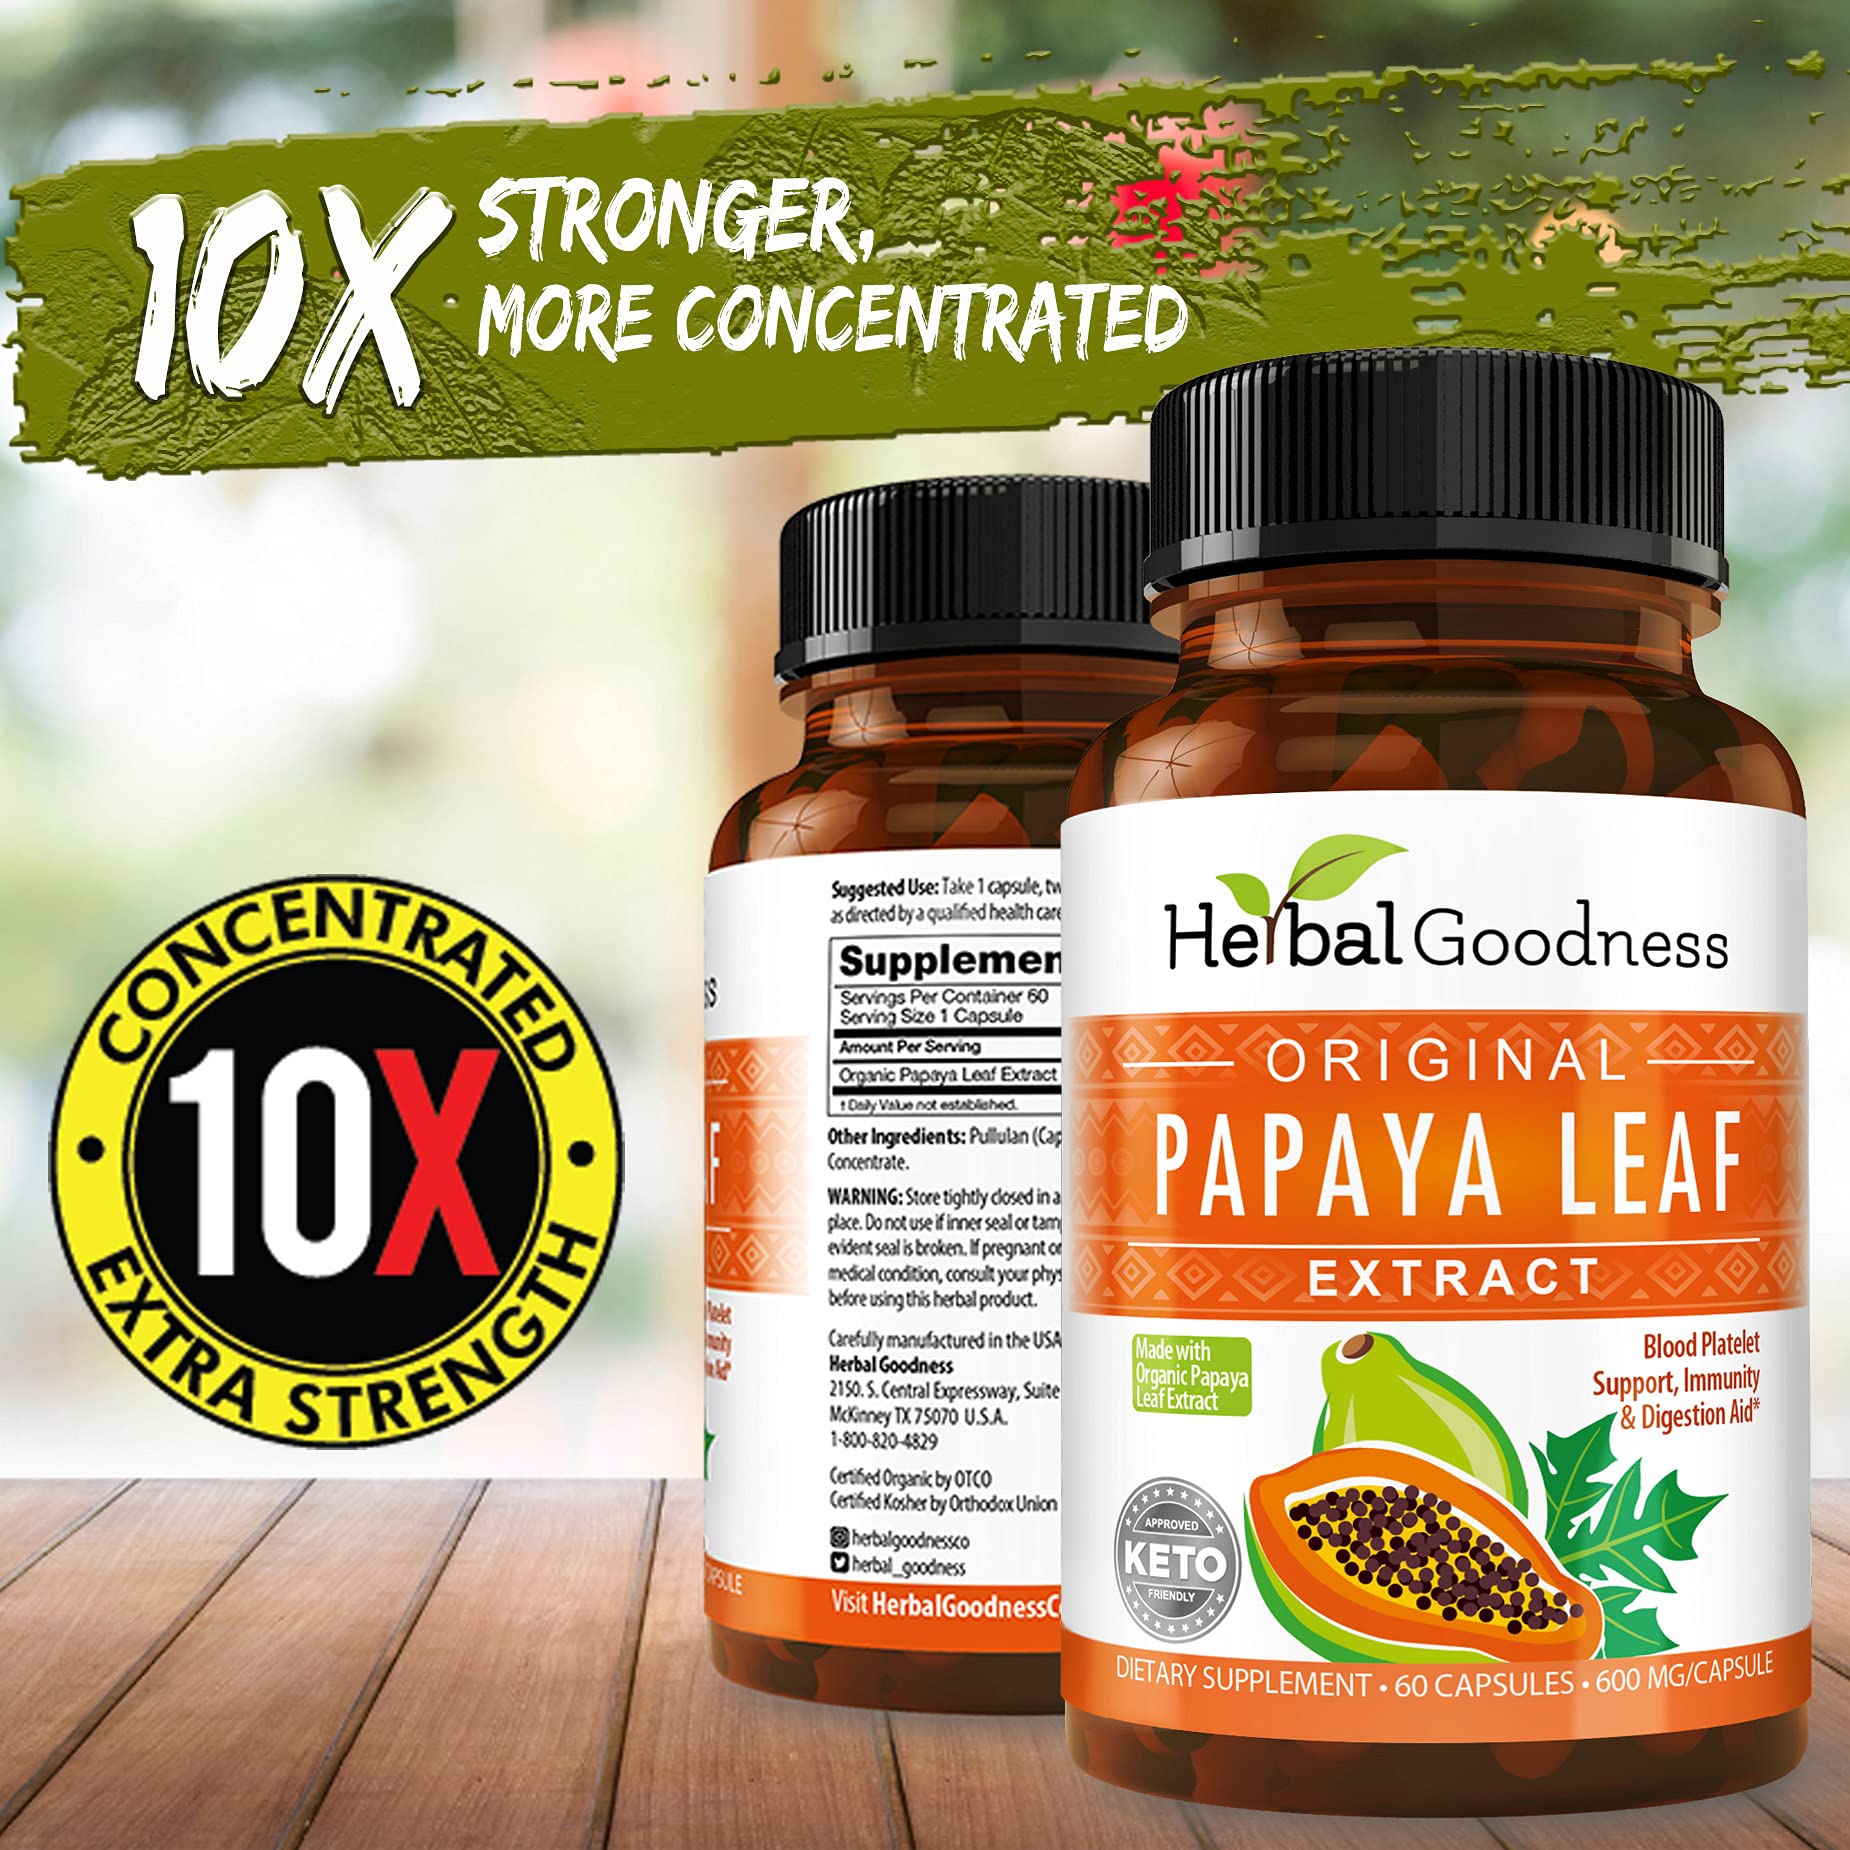 Papaya Leaf Extract Bundle - Includes Digestive Veg Capsules 60/600mg and Platelet Support 16oz - Herbal Goodness